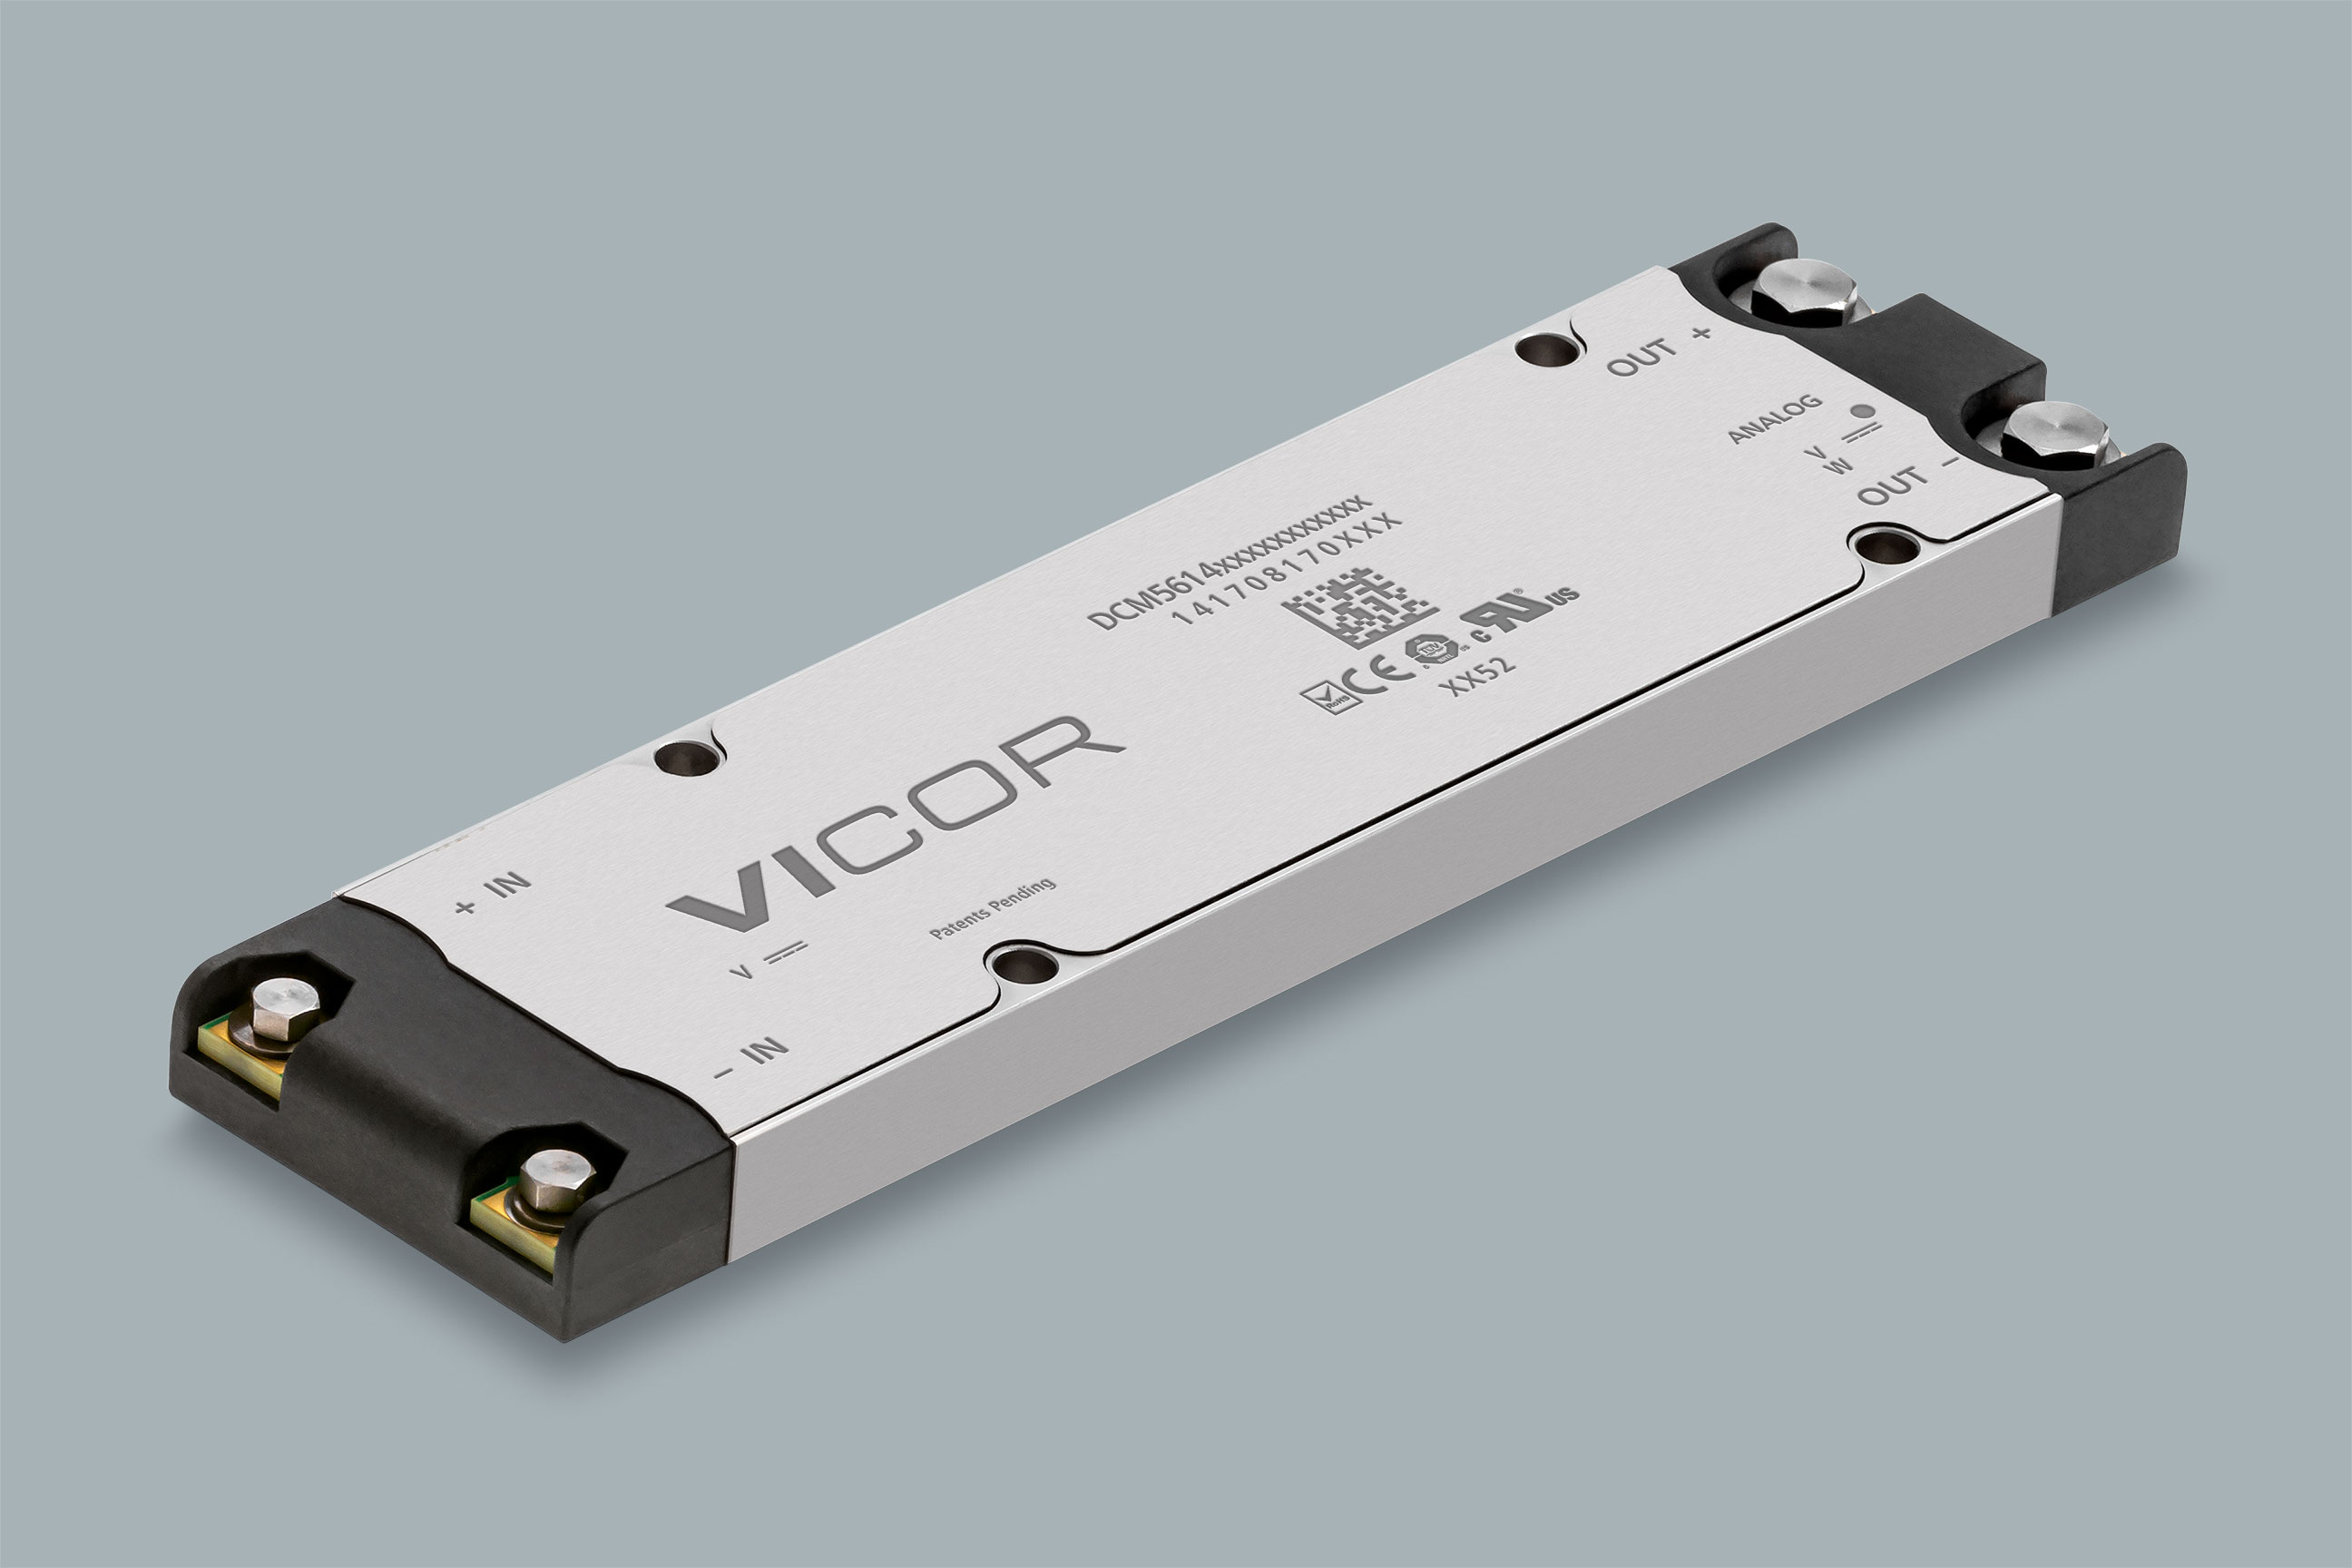 DC to DC Converter Provides 1300W of Power at 96% Efficiency